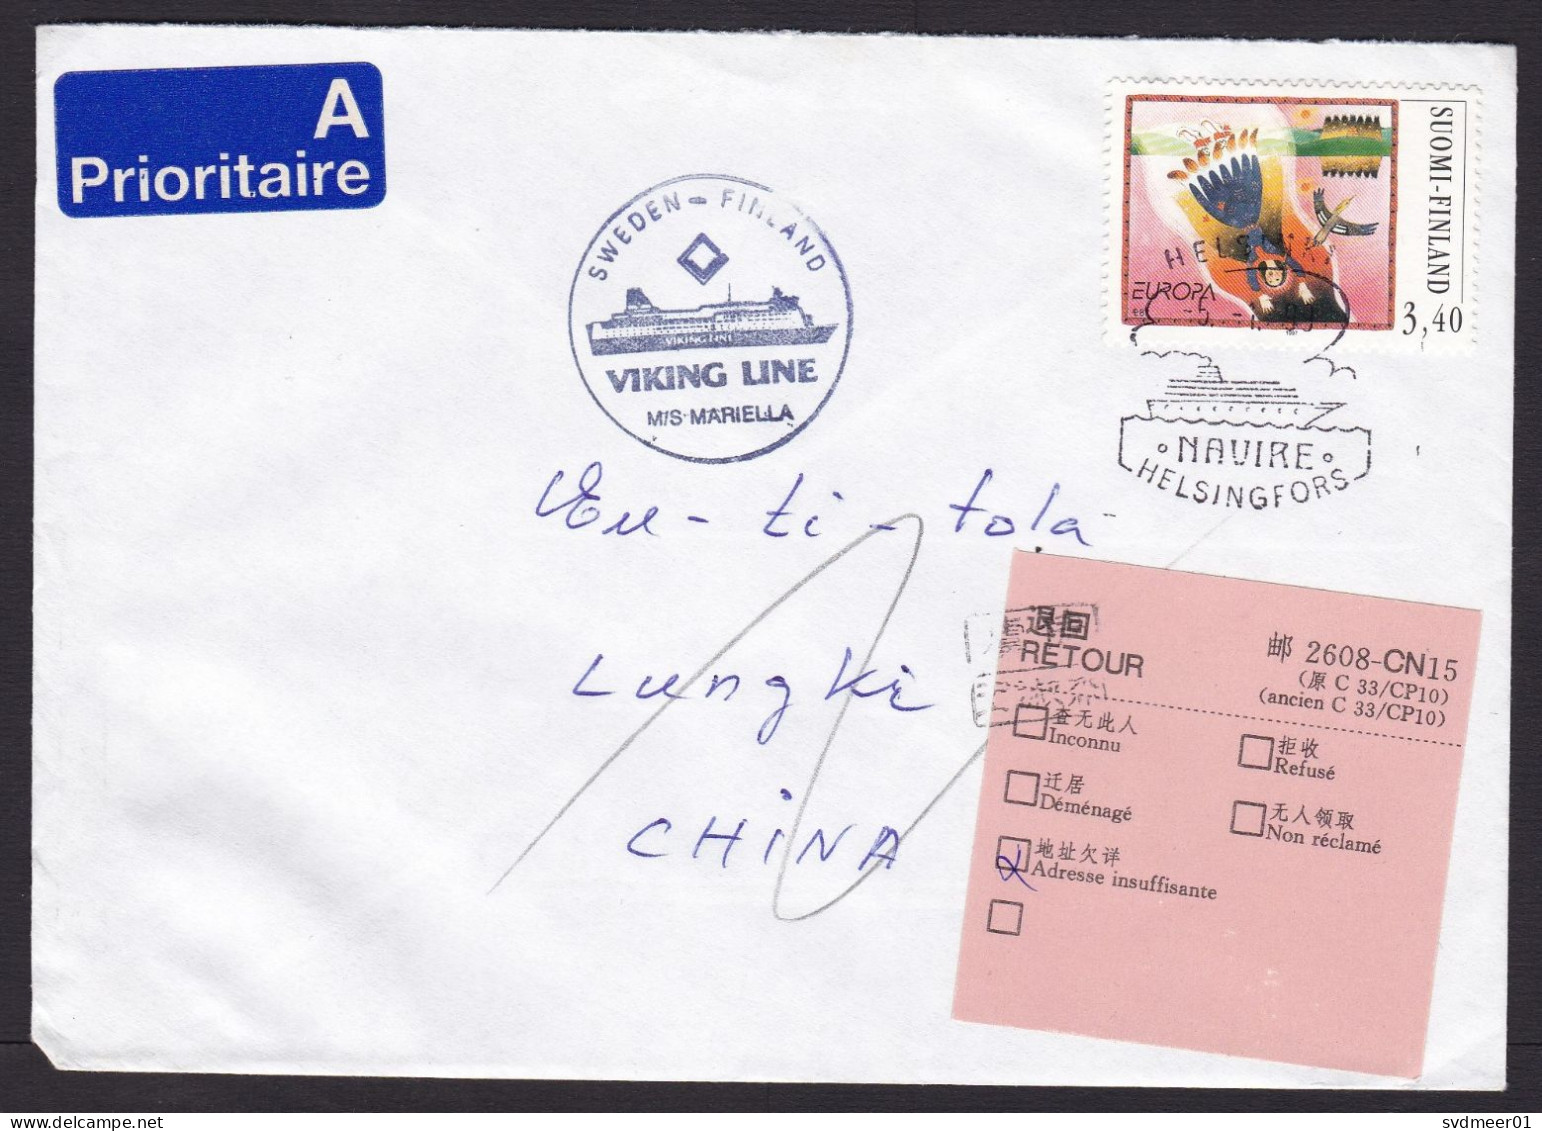 Finland: Cover To China, 1999, 1 Stamp, Ship Cancel Viking Line, Returned, CN15 Retour Label (traces Of Use) - Storia Postale